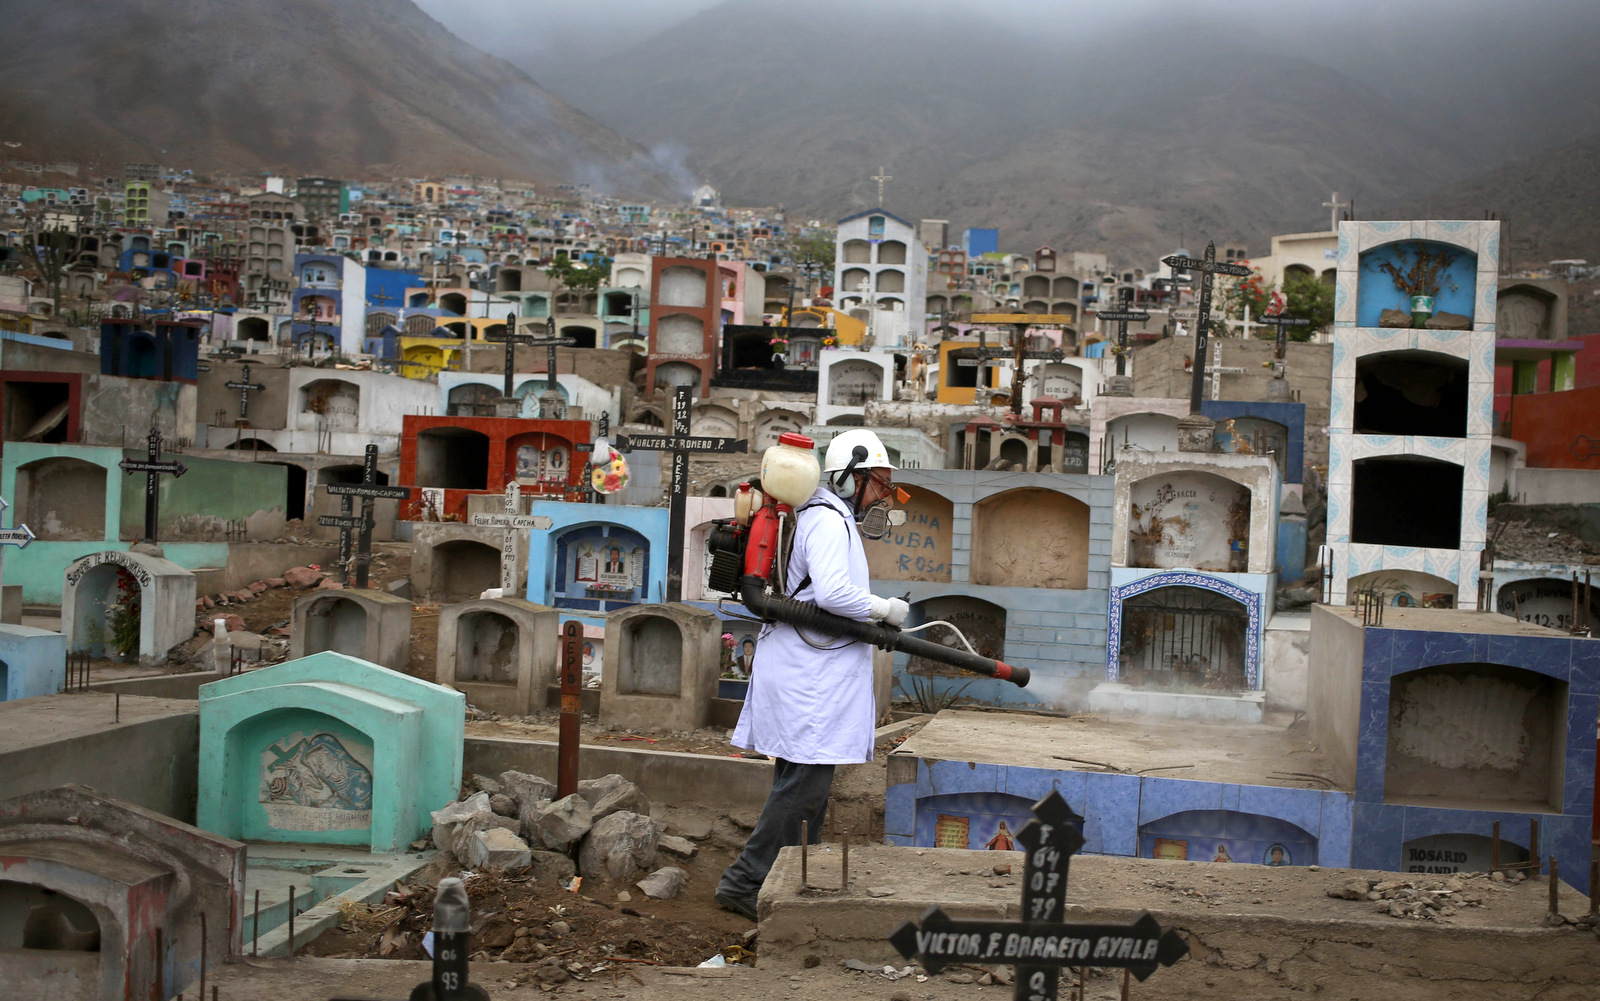 A health worker fumigates to prevent Dengue, Chikungunya and Zika virus, at the Martires 19 de Julio cemetery in the outskirts of Lima, Peru, Tuesday, Feb 9, 2016. (AP Photo/Martin Mejia)